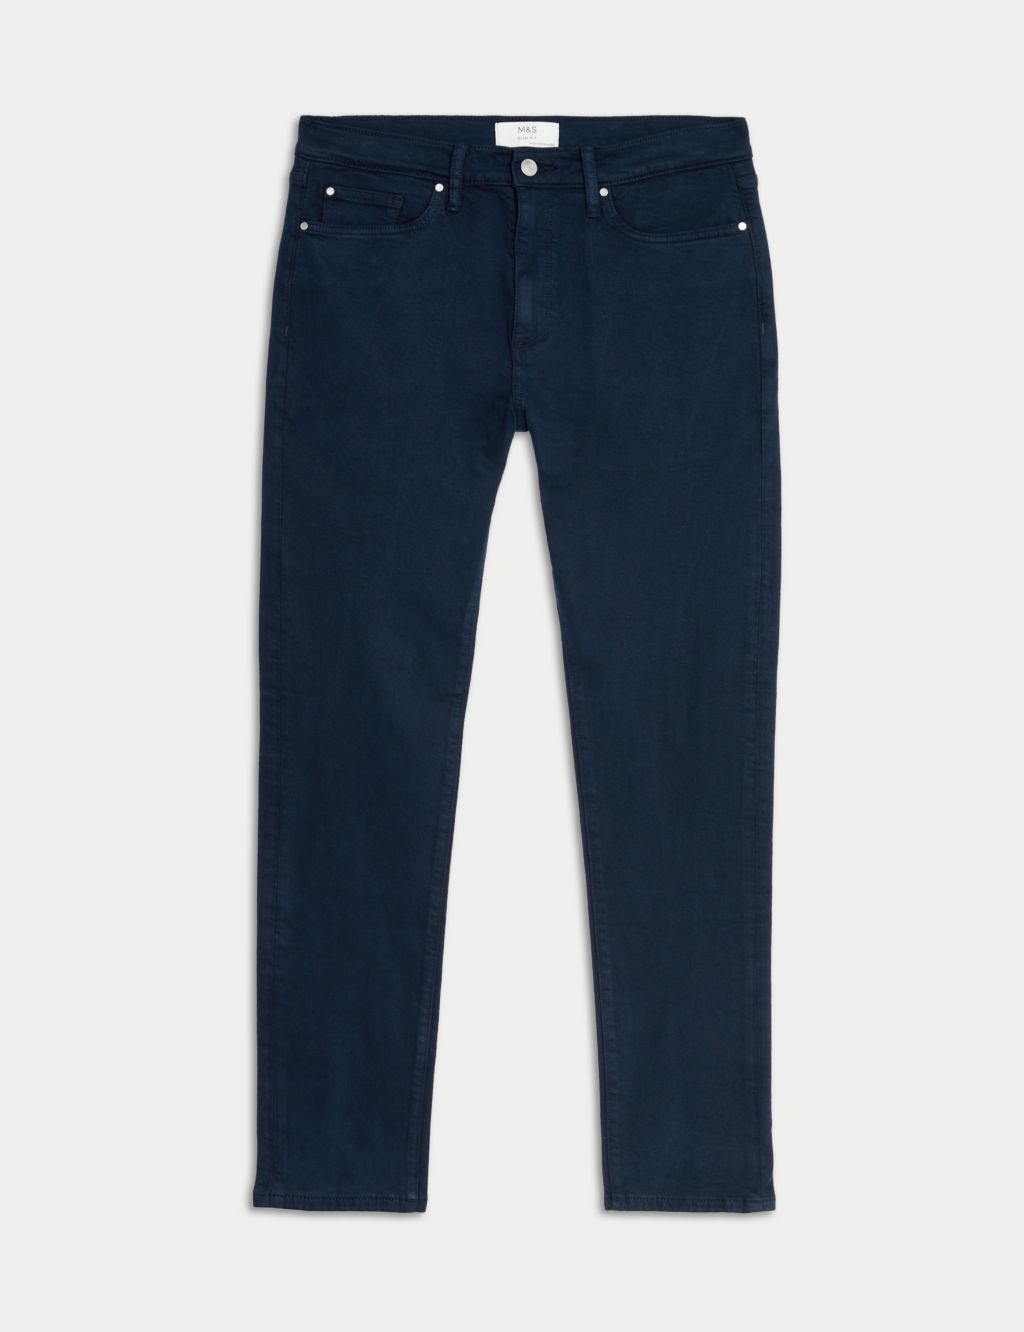 Slim Fit Tea Dyed Stretch Jeans image 2